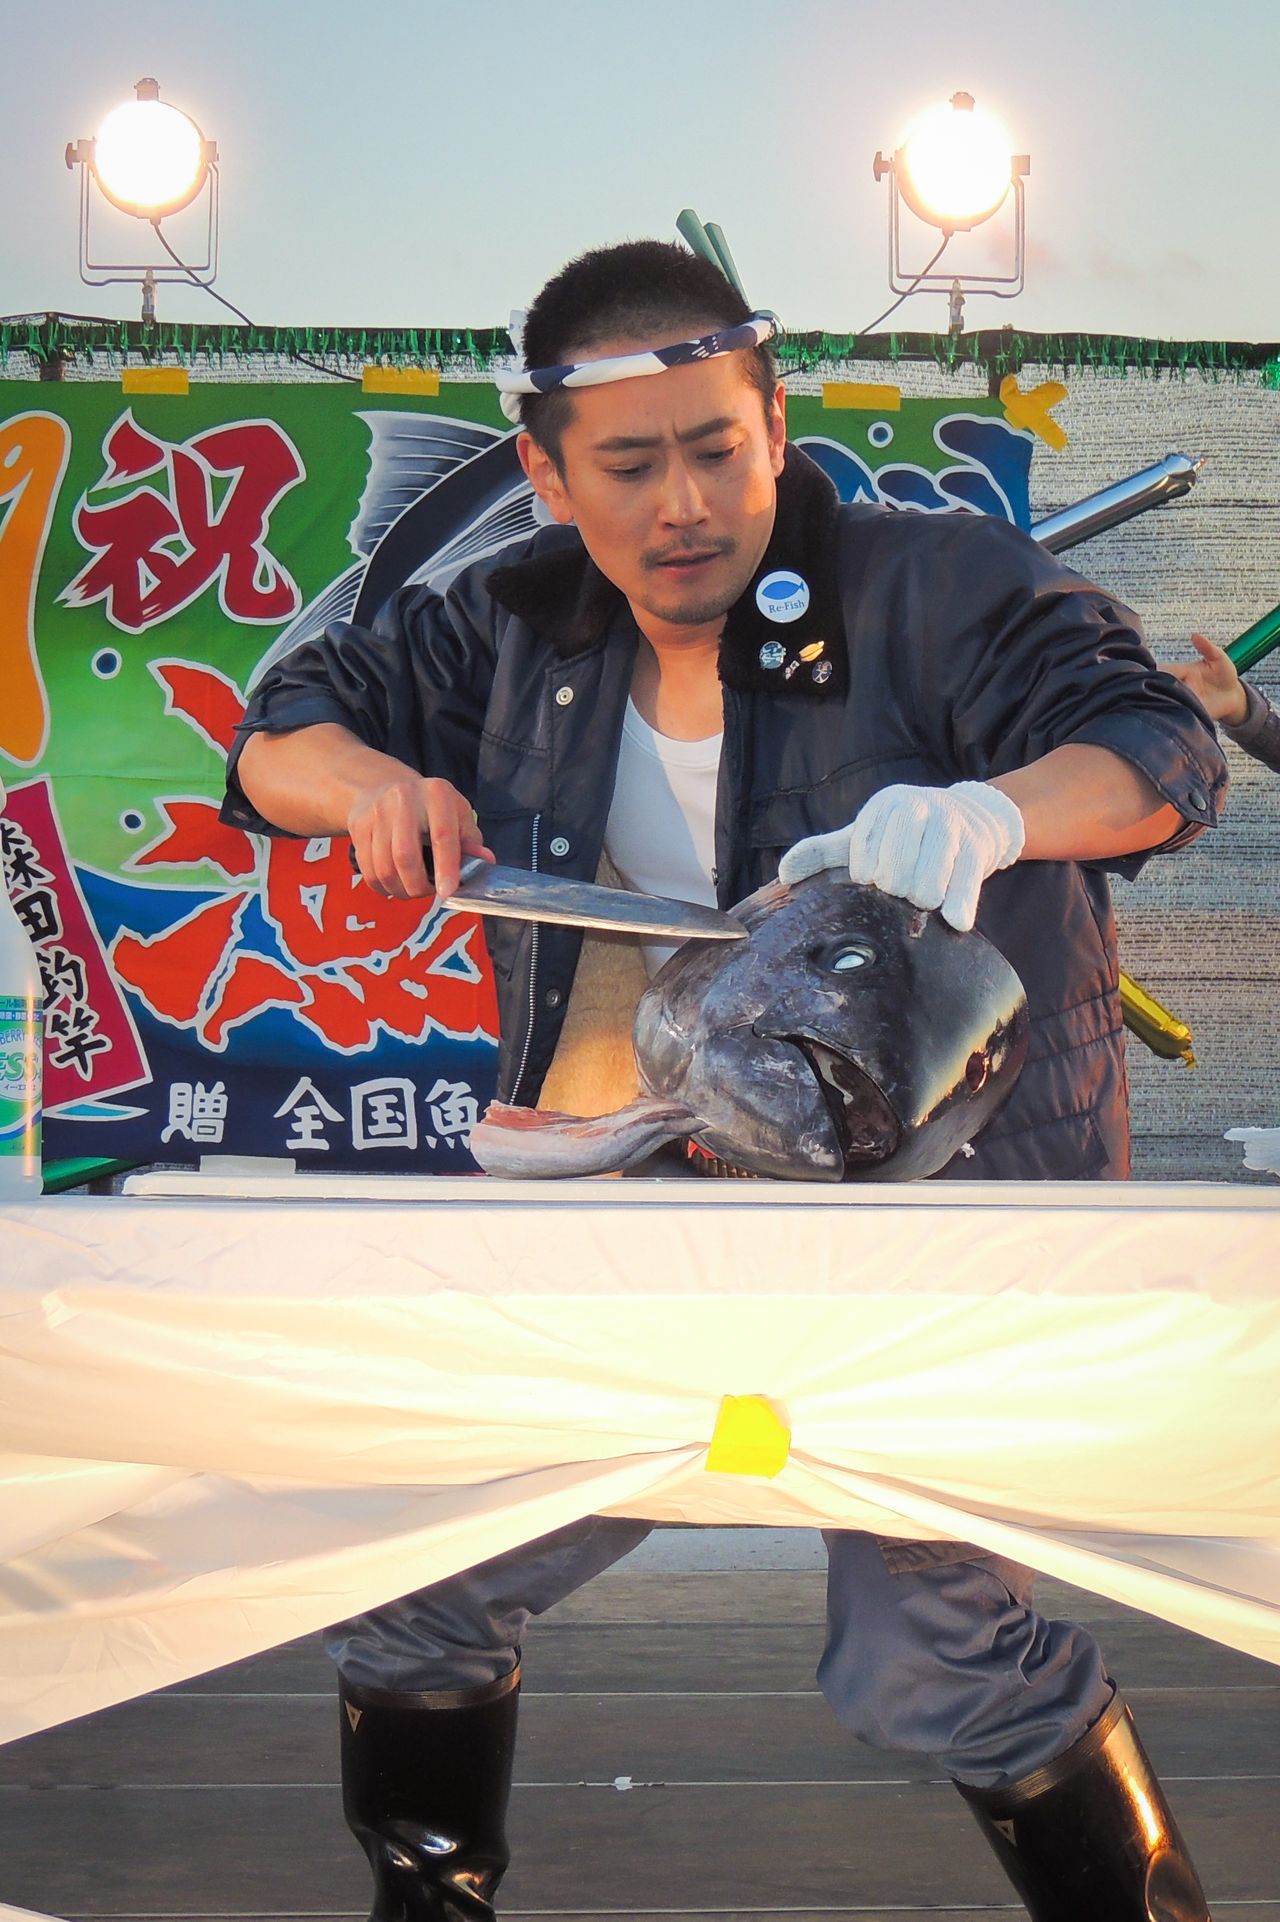 Slicing a savory delicacy during a tuna carving demonstration at a music event.  Morita and his band put on a similar performance at the famed Budōkan in Tokyo, Japan's rock music mecca.  (©Kawamoto Daigo)